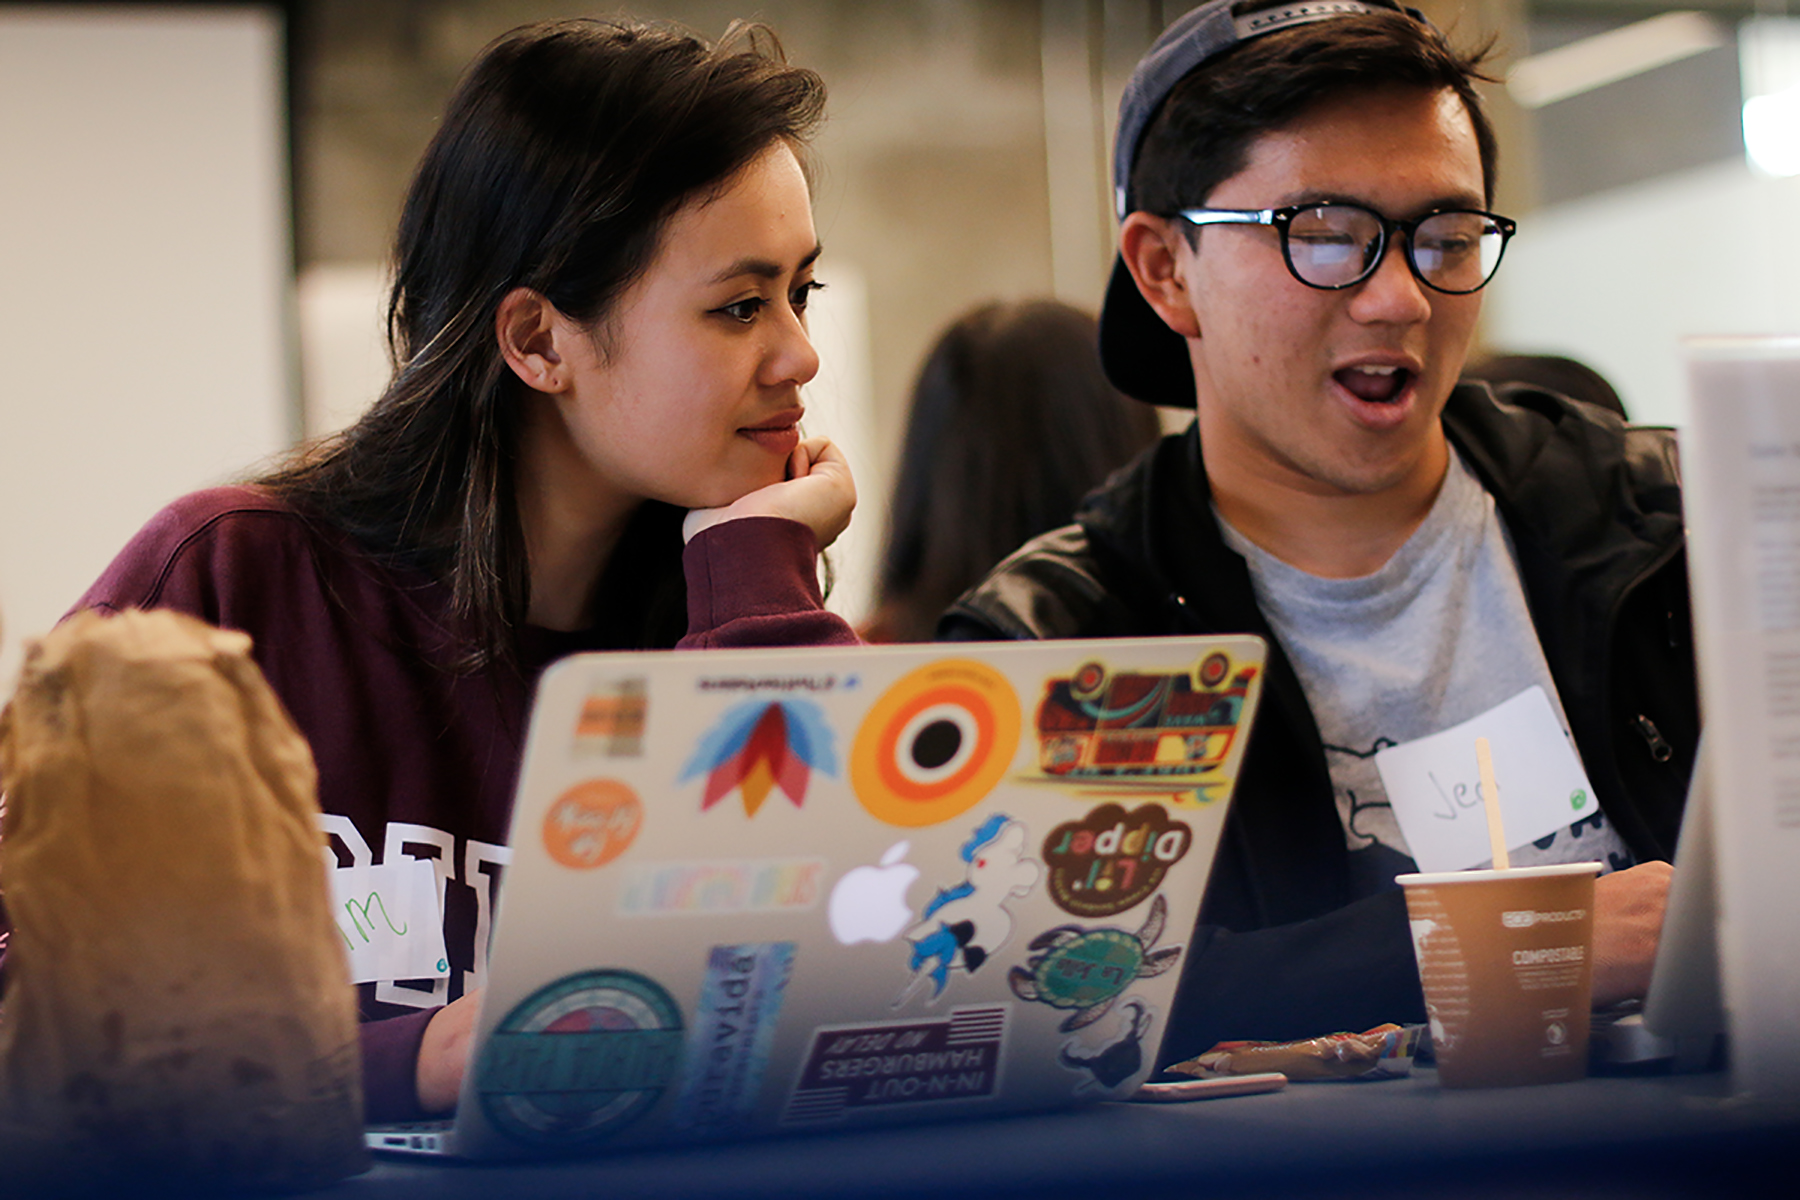  Kim Do, left, and Jed Lee participate in the Wikipedia Edit-A-Thon event at Moffitt Library on March 6, 2018. (Photo by J. Pierre Carrillo for the UC Berkeley Library)